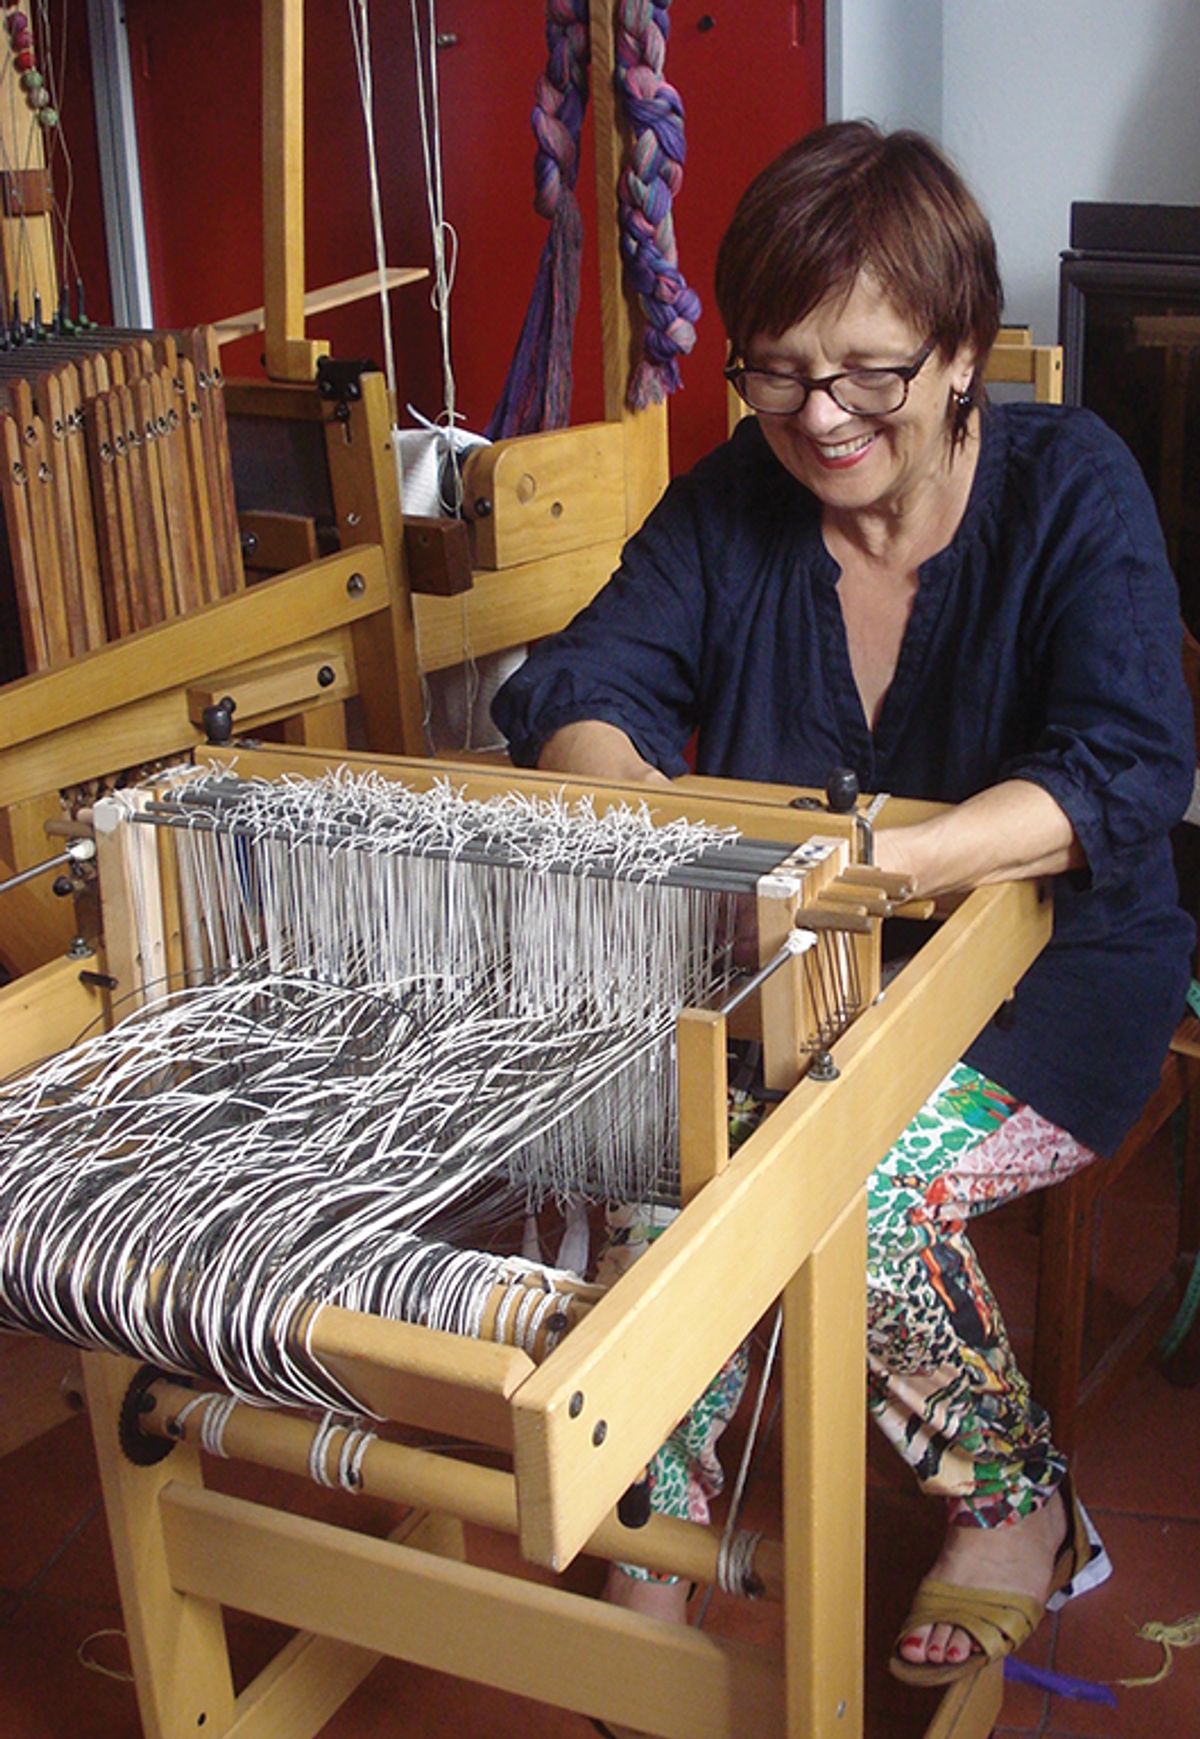 Helena Loermans works on a handloom at her studio in southern Portugal Courtesy of Helena Loermans